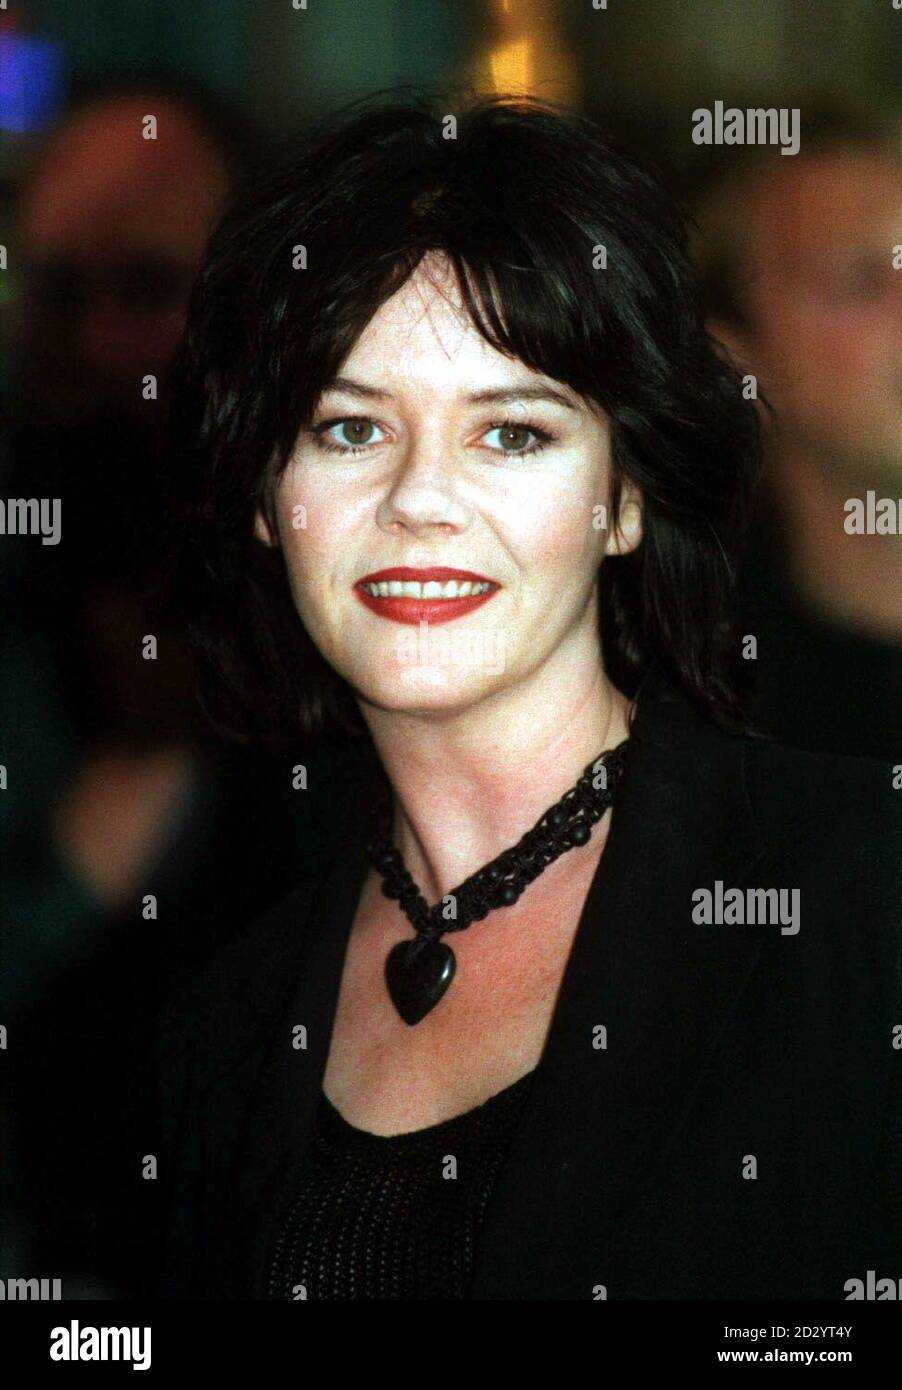 ACTRESS AND COMEDIAN JOSIE LAWRENCE ARRIVES FOR THE CHARITY PREMIERE OF 'GIRLS NIGHT' IN LONDON'S LEICESTER SQUARE. THE FILM WAS WRITTEN BY KAY MELLOR AND STARS JULIE WALTERS AND BRENDA BLETHYN. Stock Photo